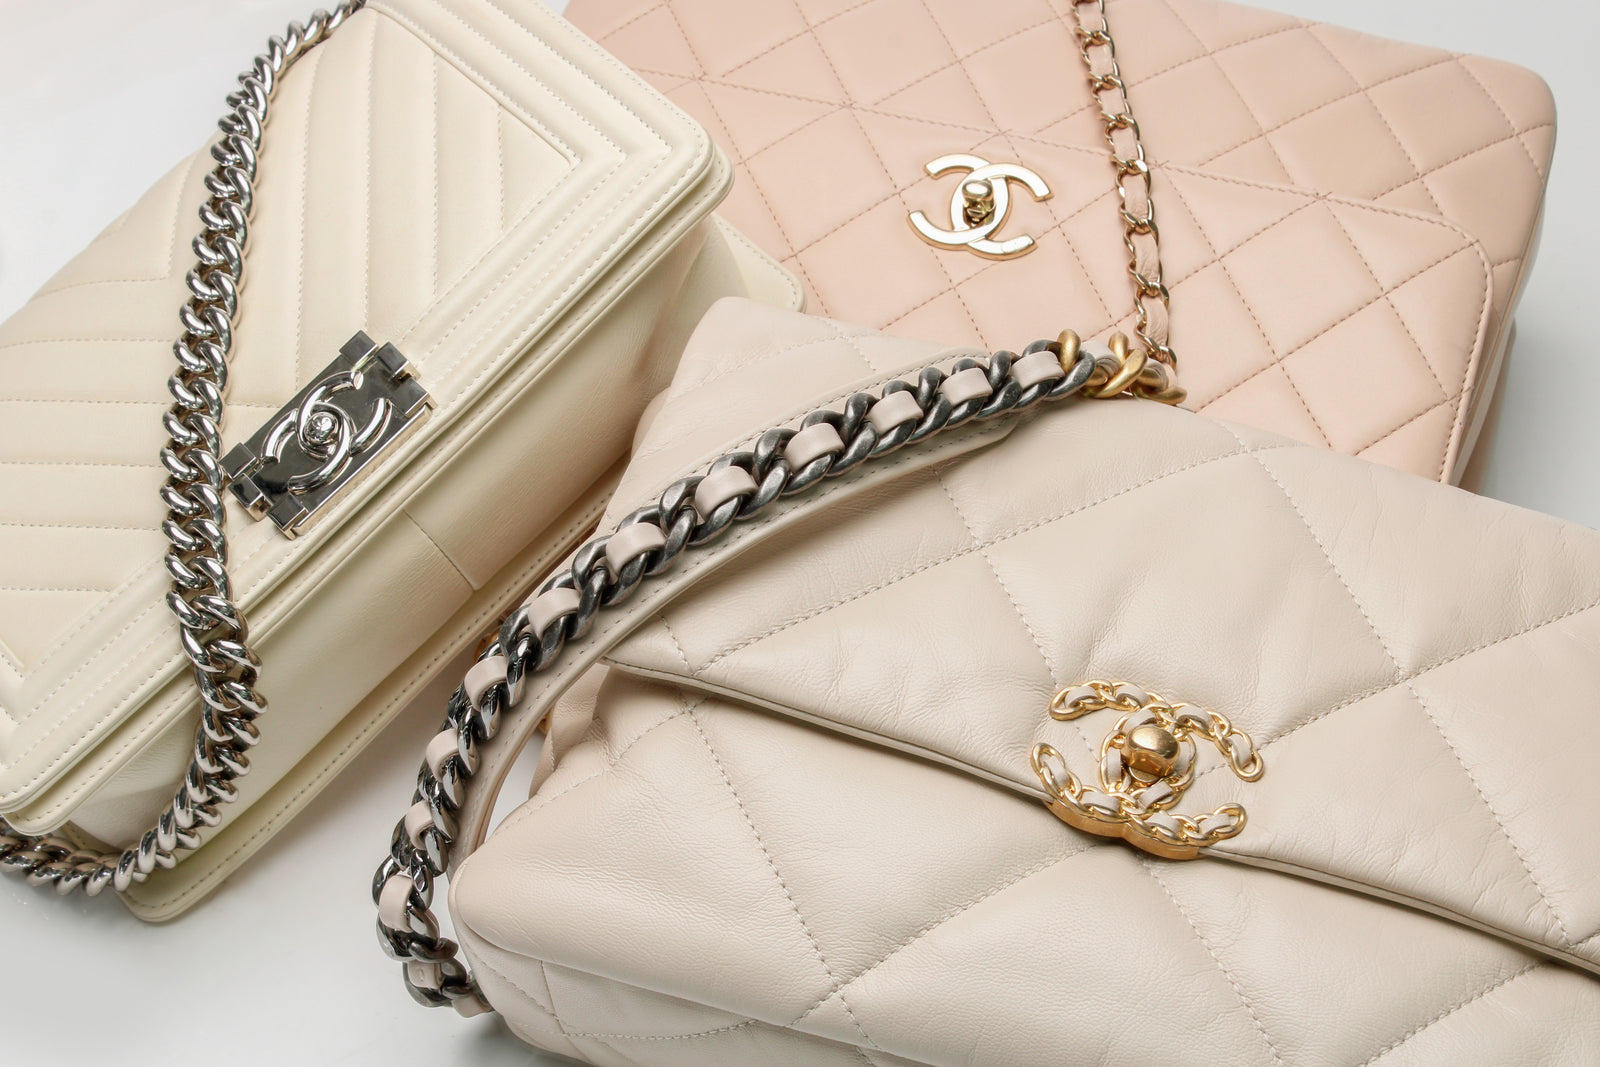 chanel us bags